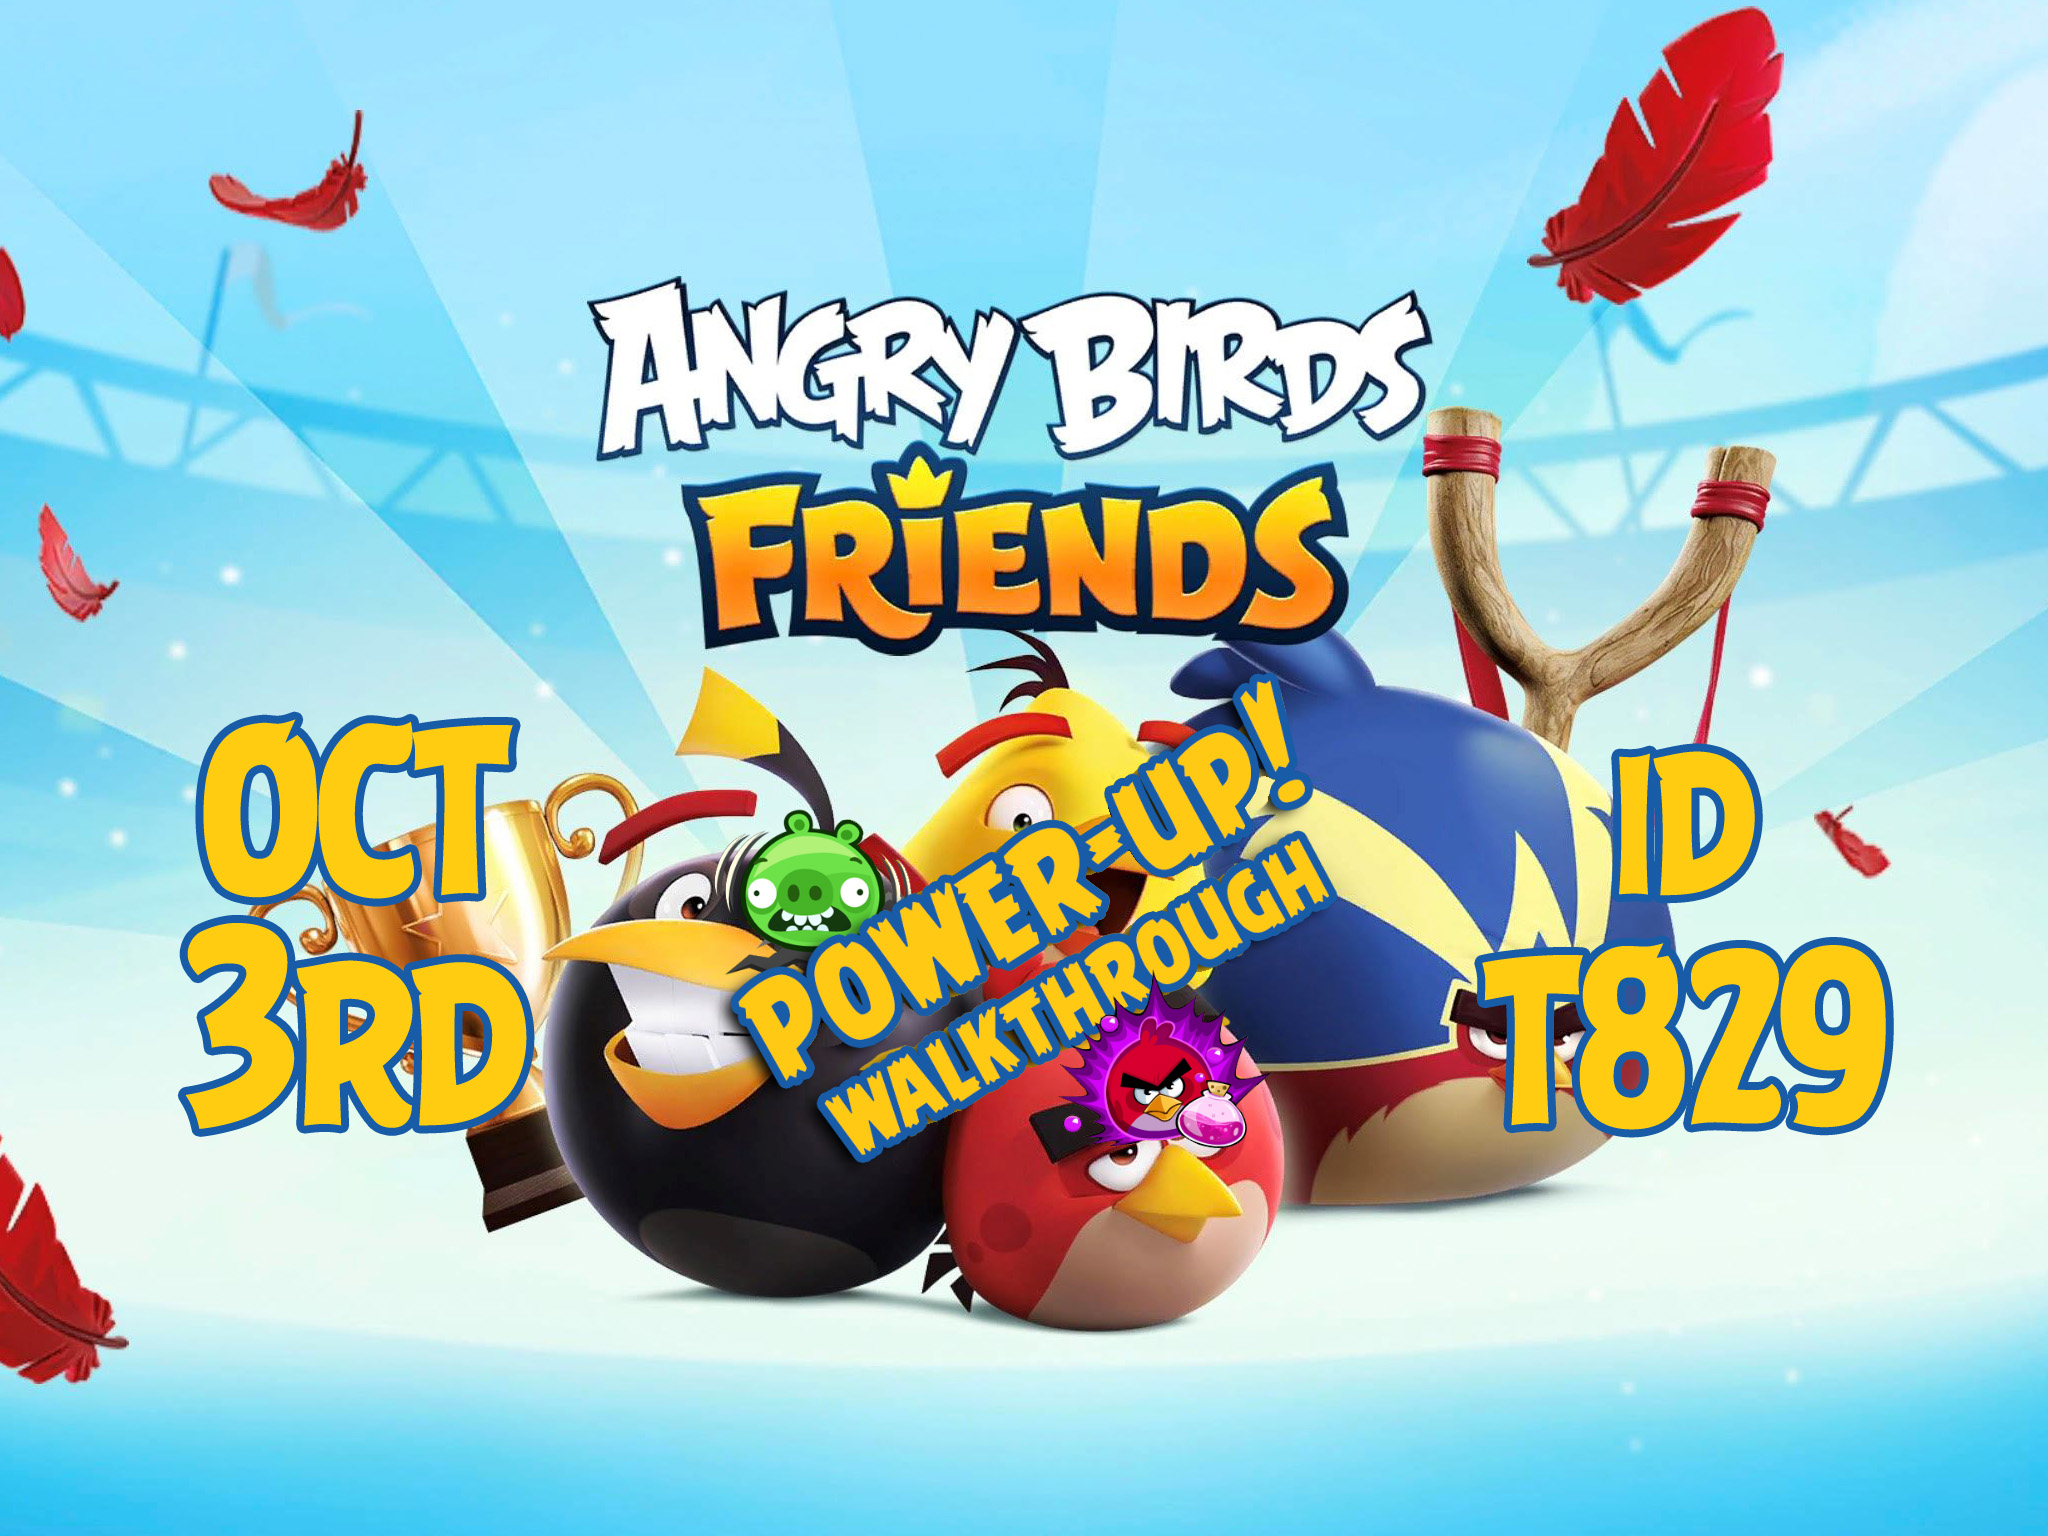 Angry-Birds-Friends-Tournament-T829-Feature-Image-PU